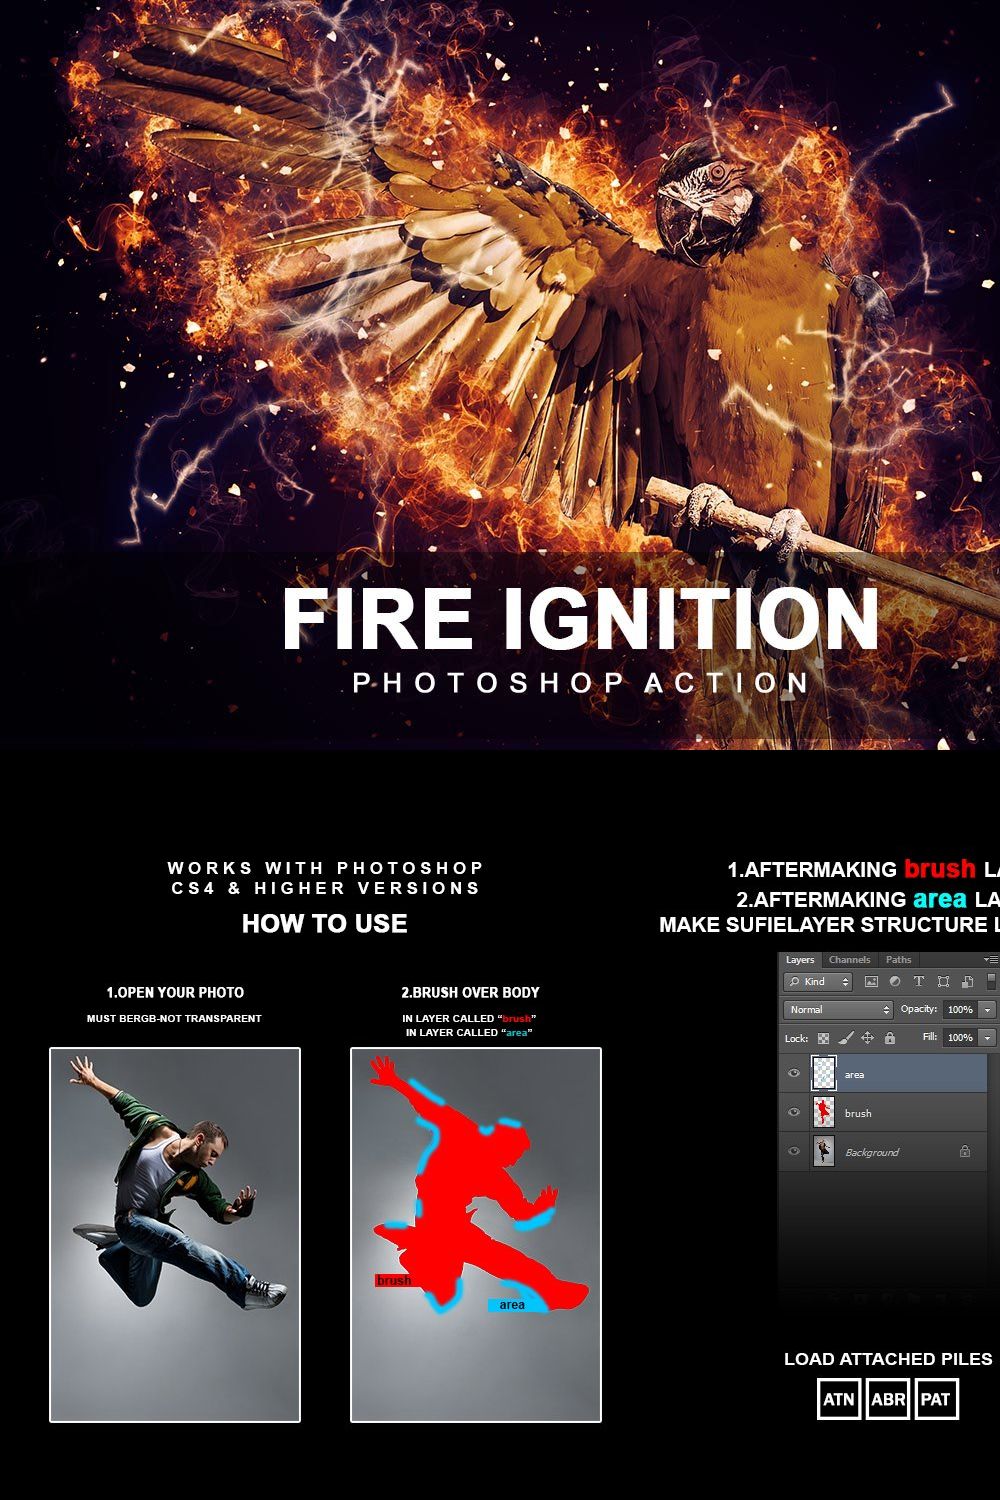 SALE! Fire Ignition Photoshop Action pinterest preview image.